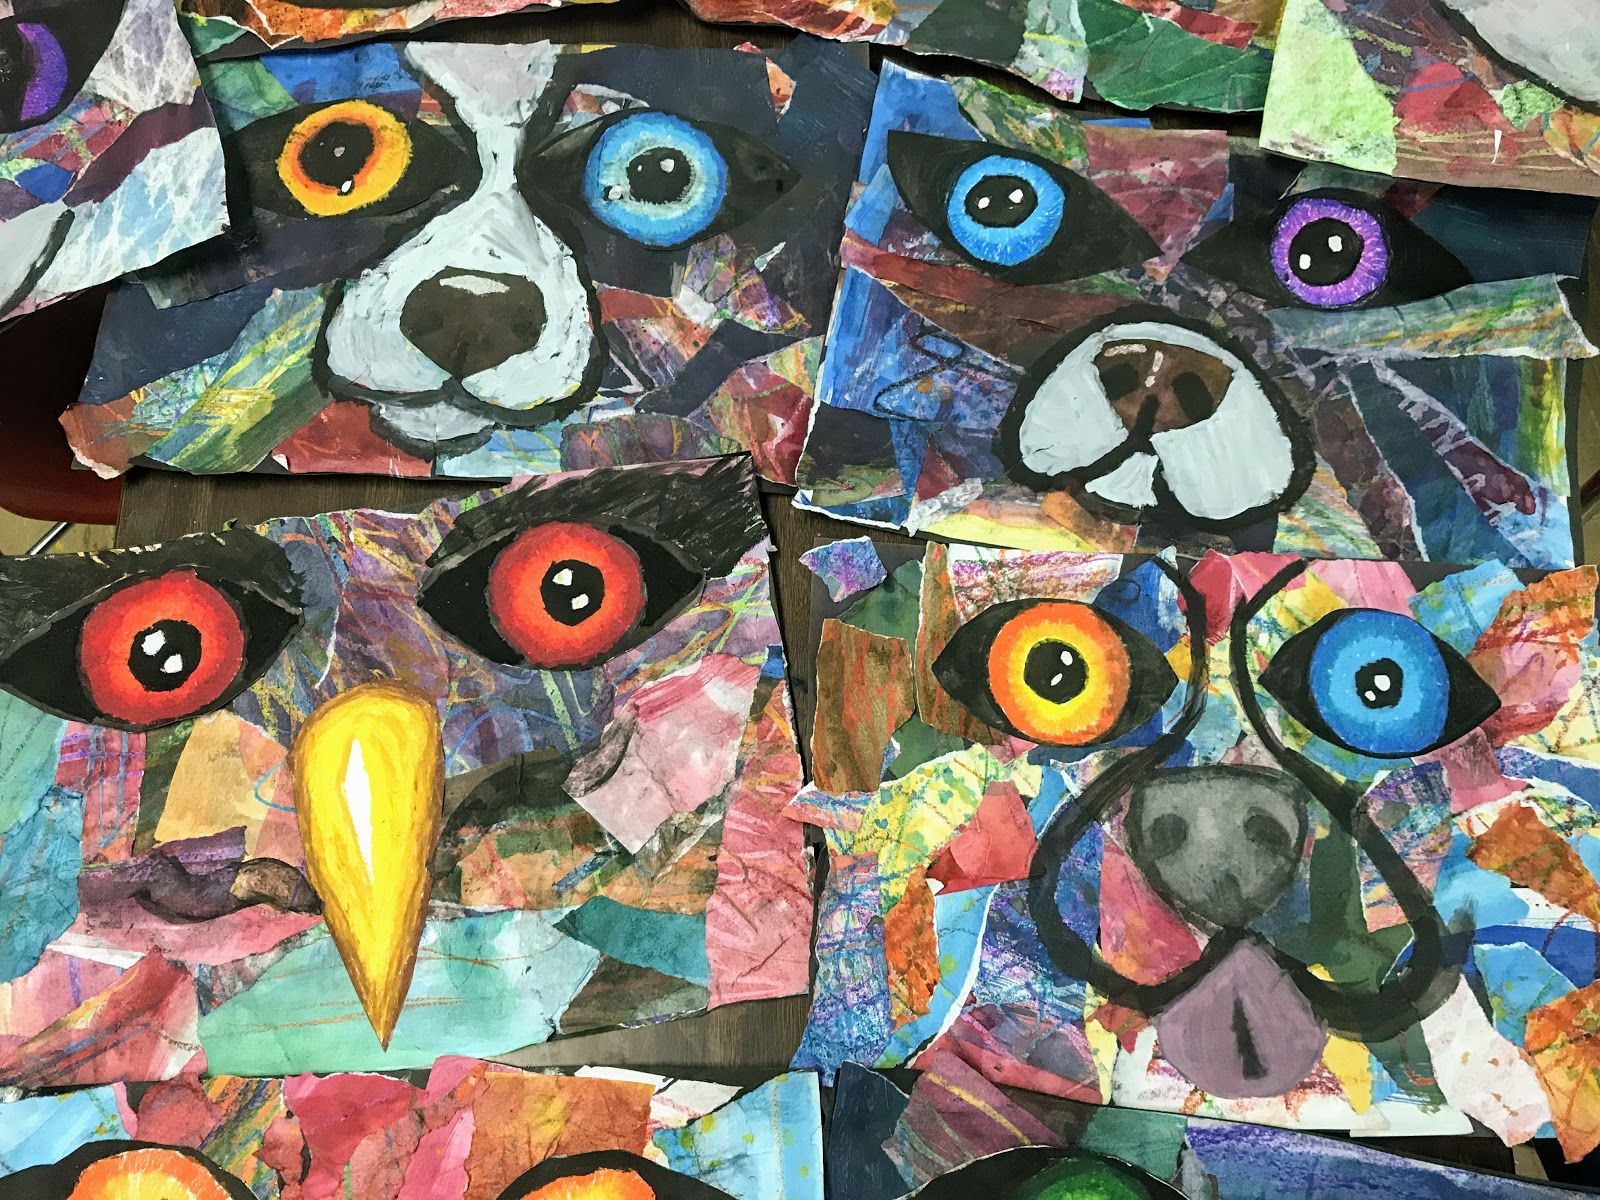 Elements of the Art Room: Collage Animal Faces